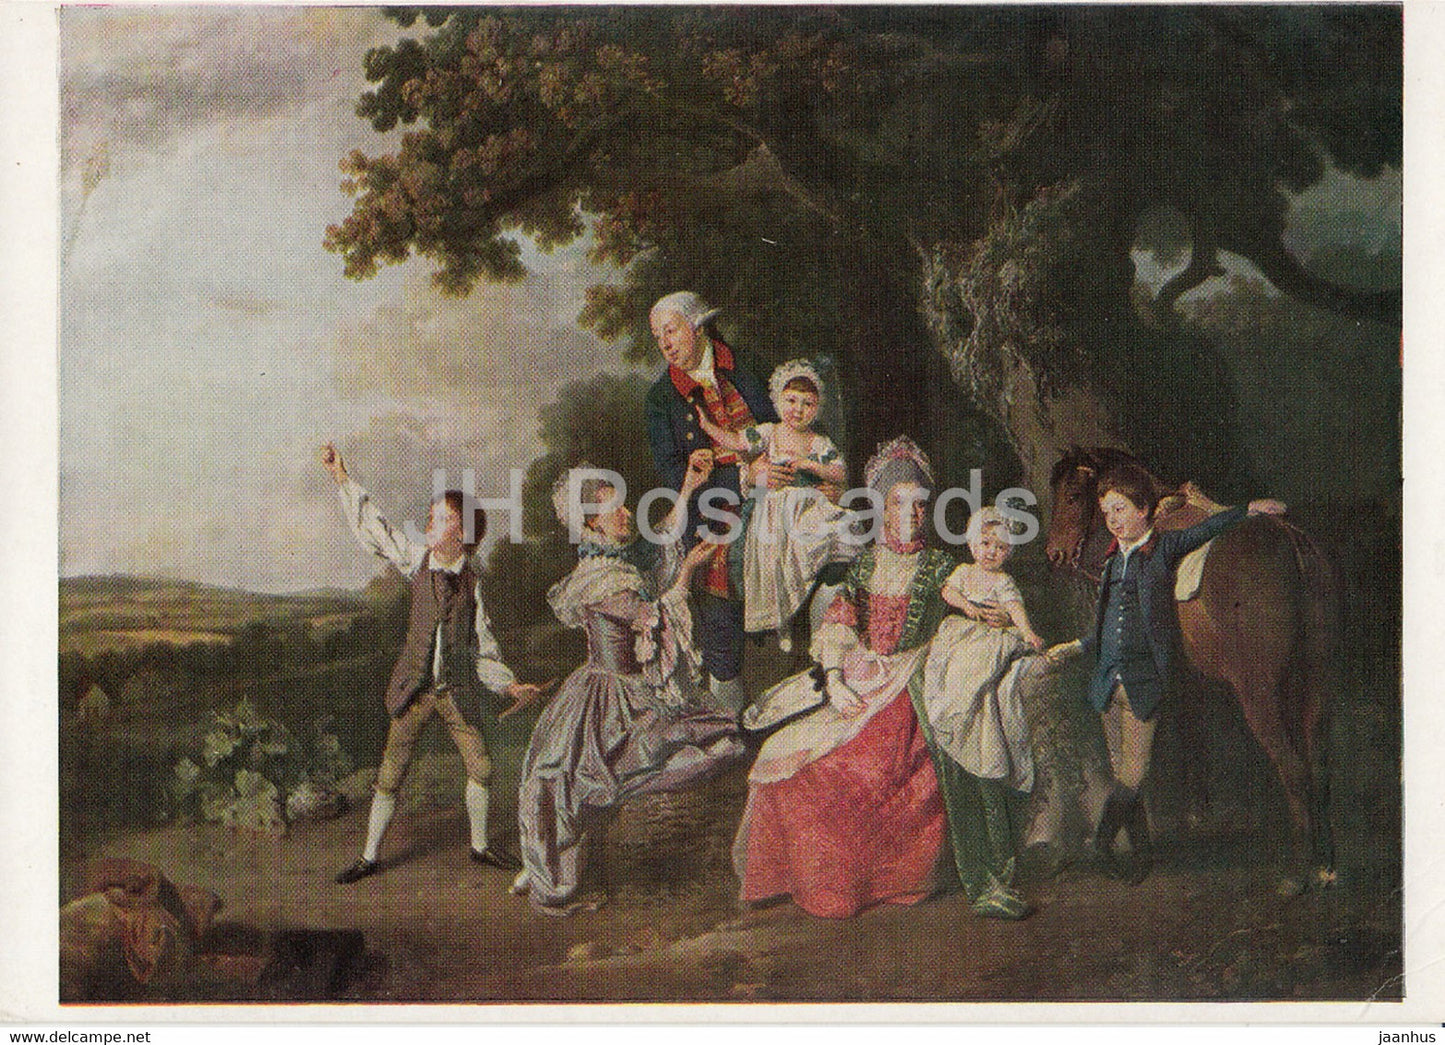 painting by Johann Zoffany - The Bradshaw Family - horse - German art - 1993 - Great Britain - unused - JH Postcards